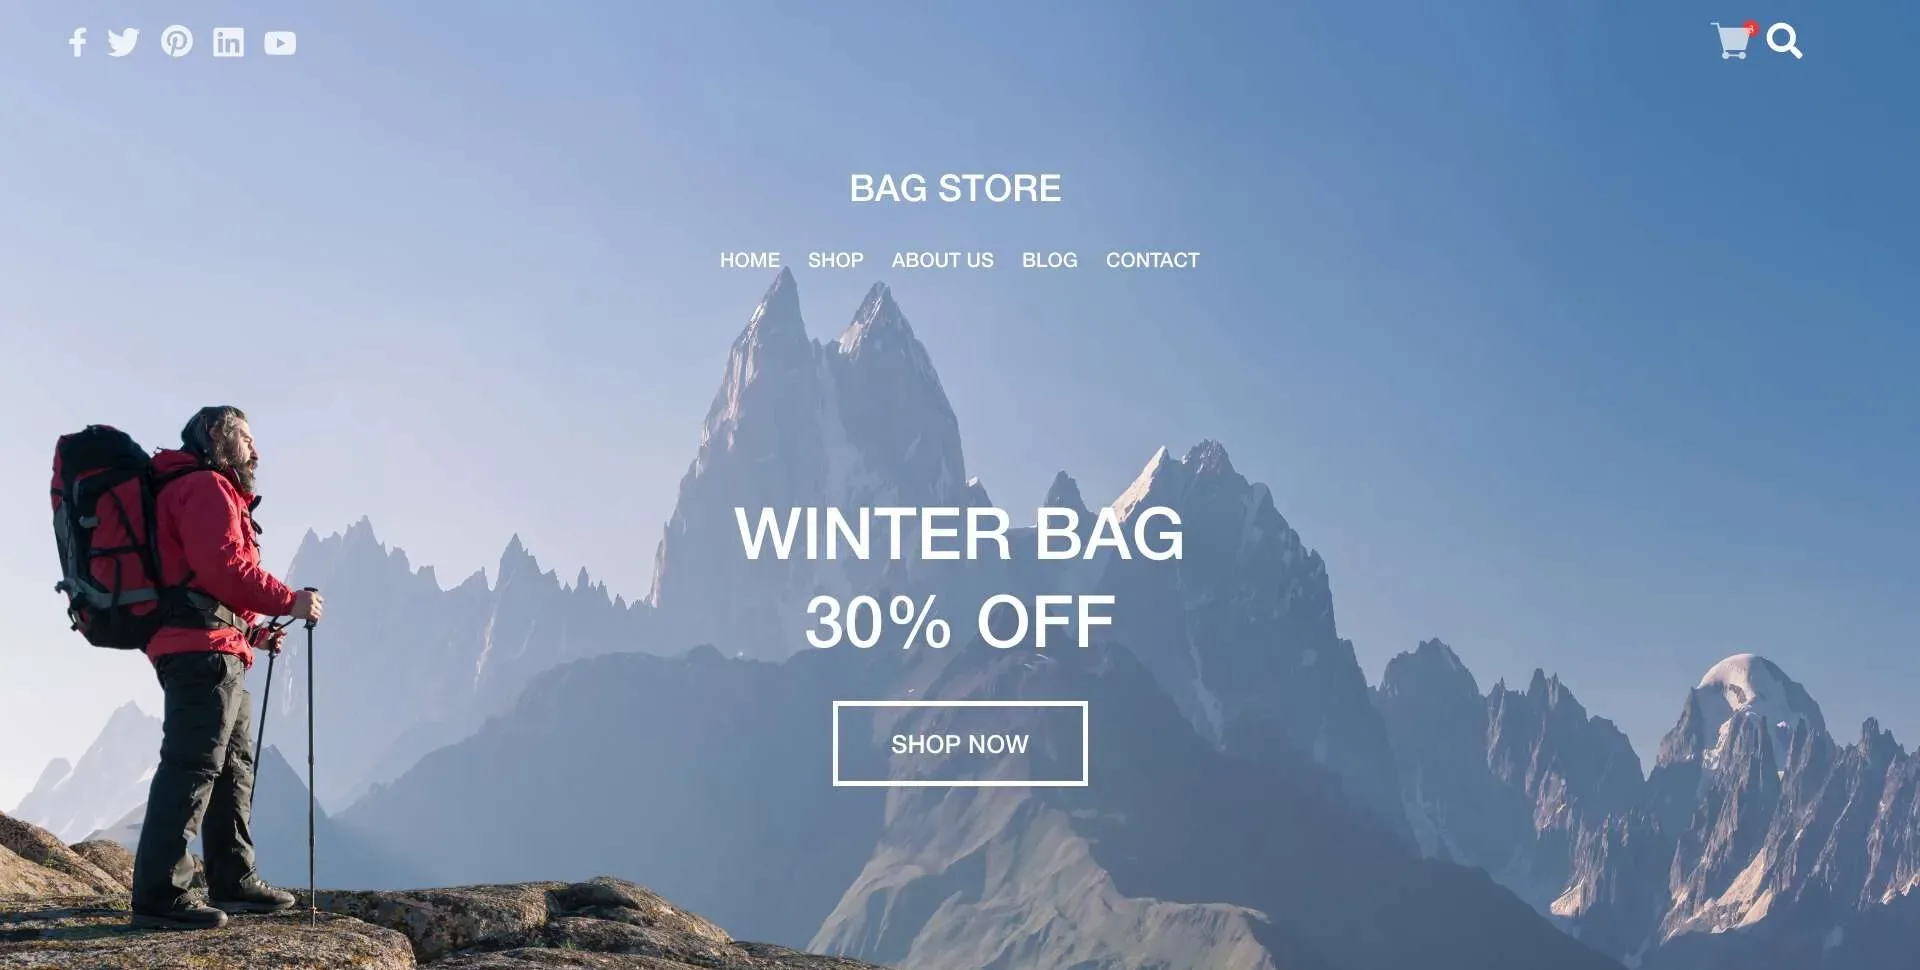 Bags for Every Adventure store expert shopify consulting services